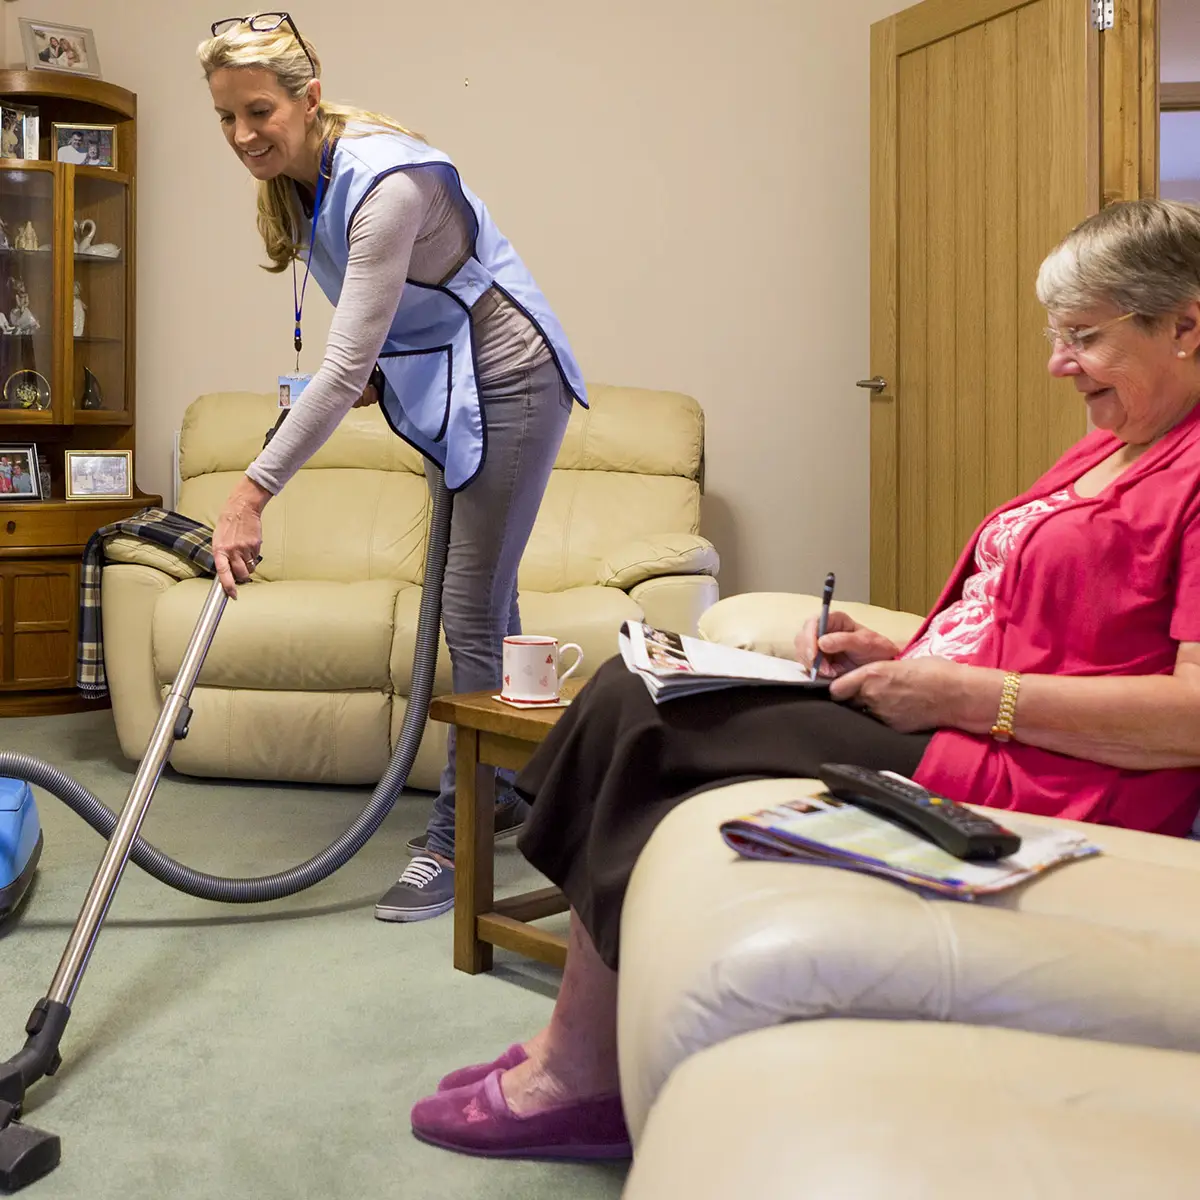 Care worker making a home visit. Female caregiver is hoovering the living room to help an elderly woman. The woman is sitting on a sofa relaxing